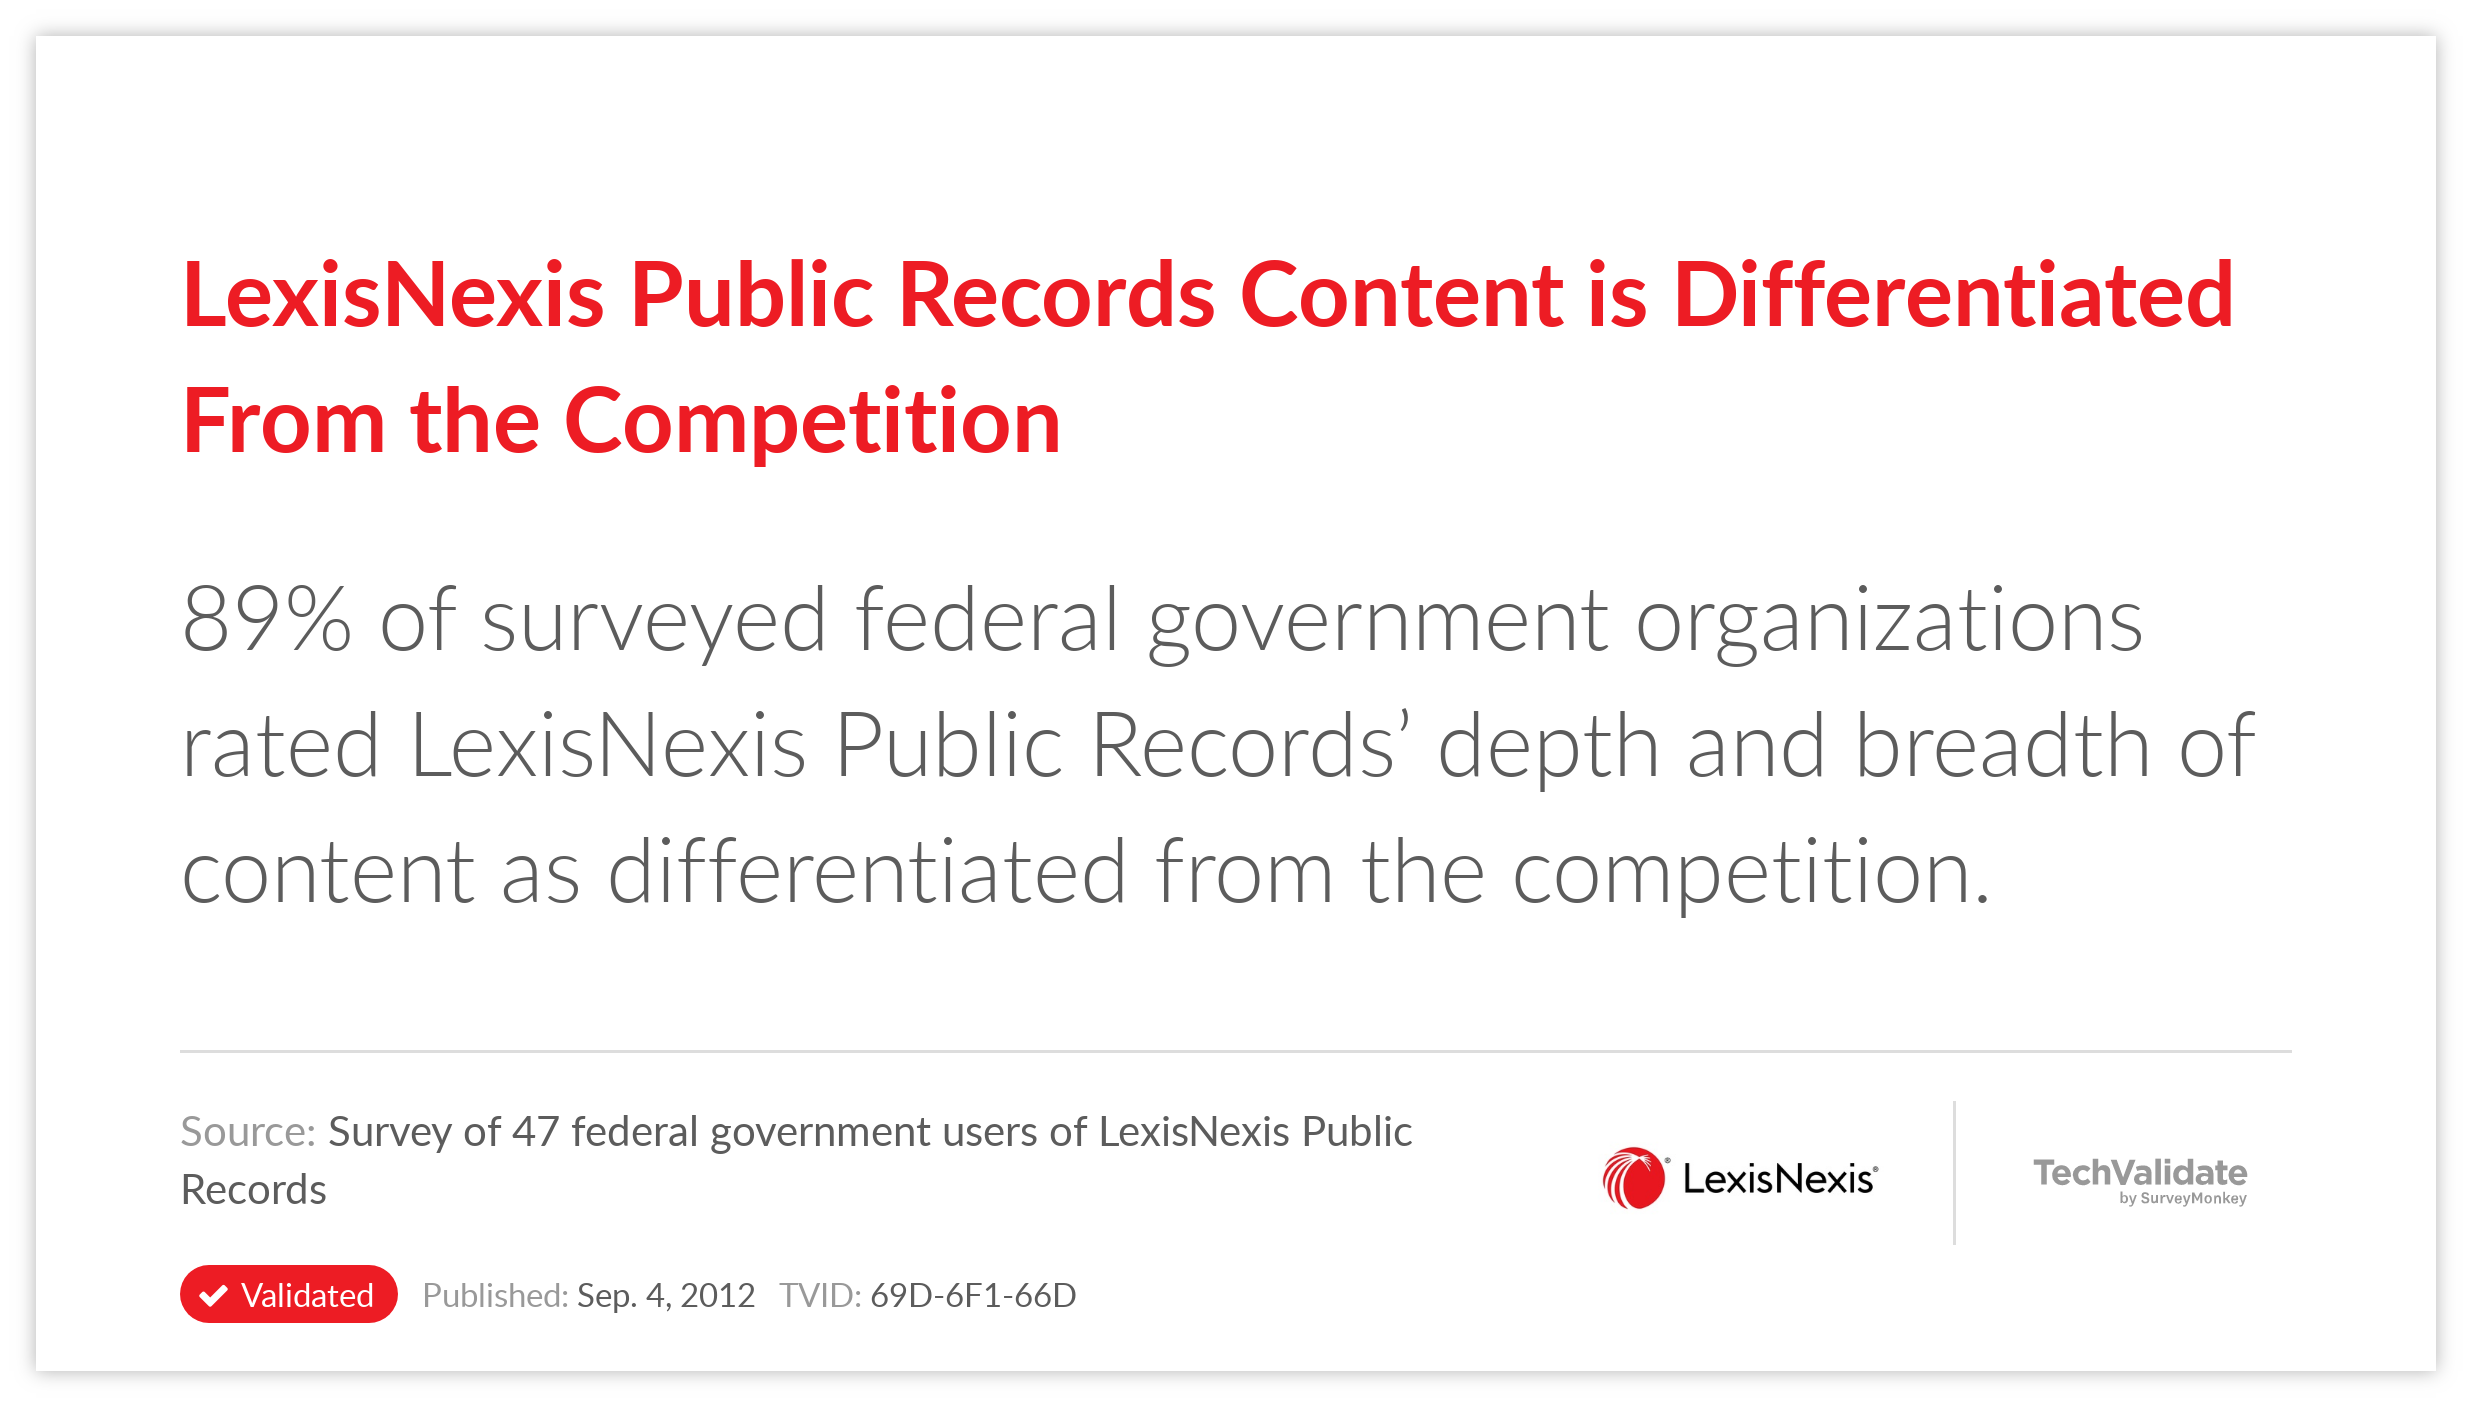 LexisNexis Public Records Content is Differentiated From the Competition